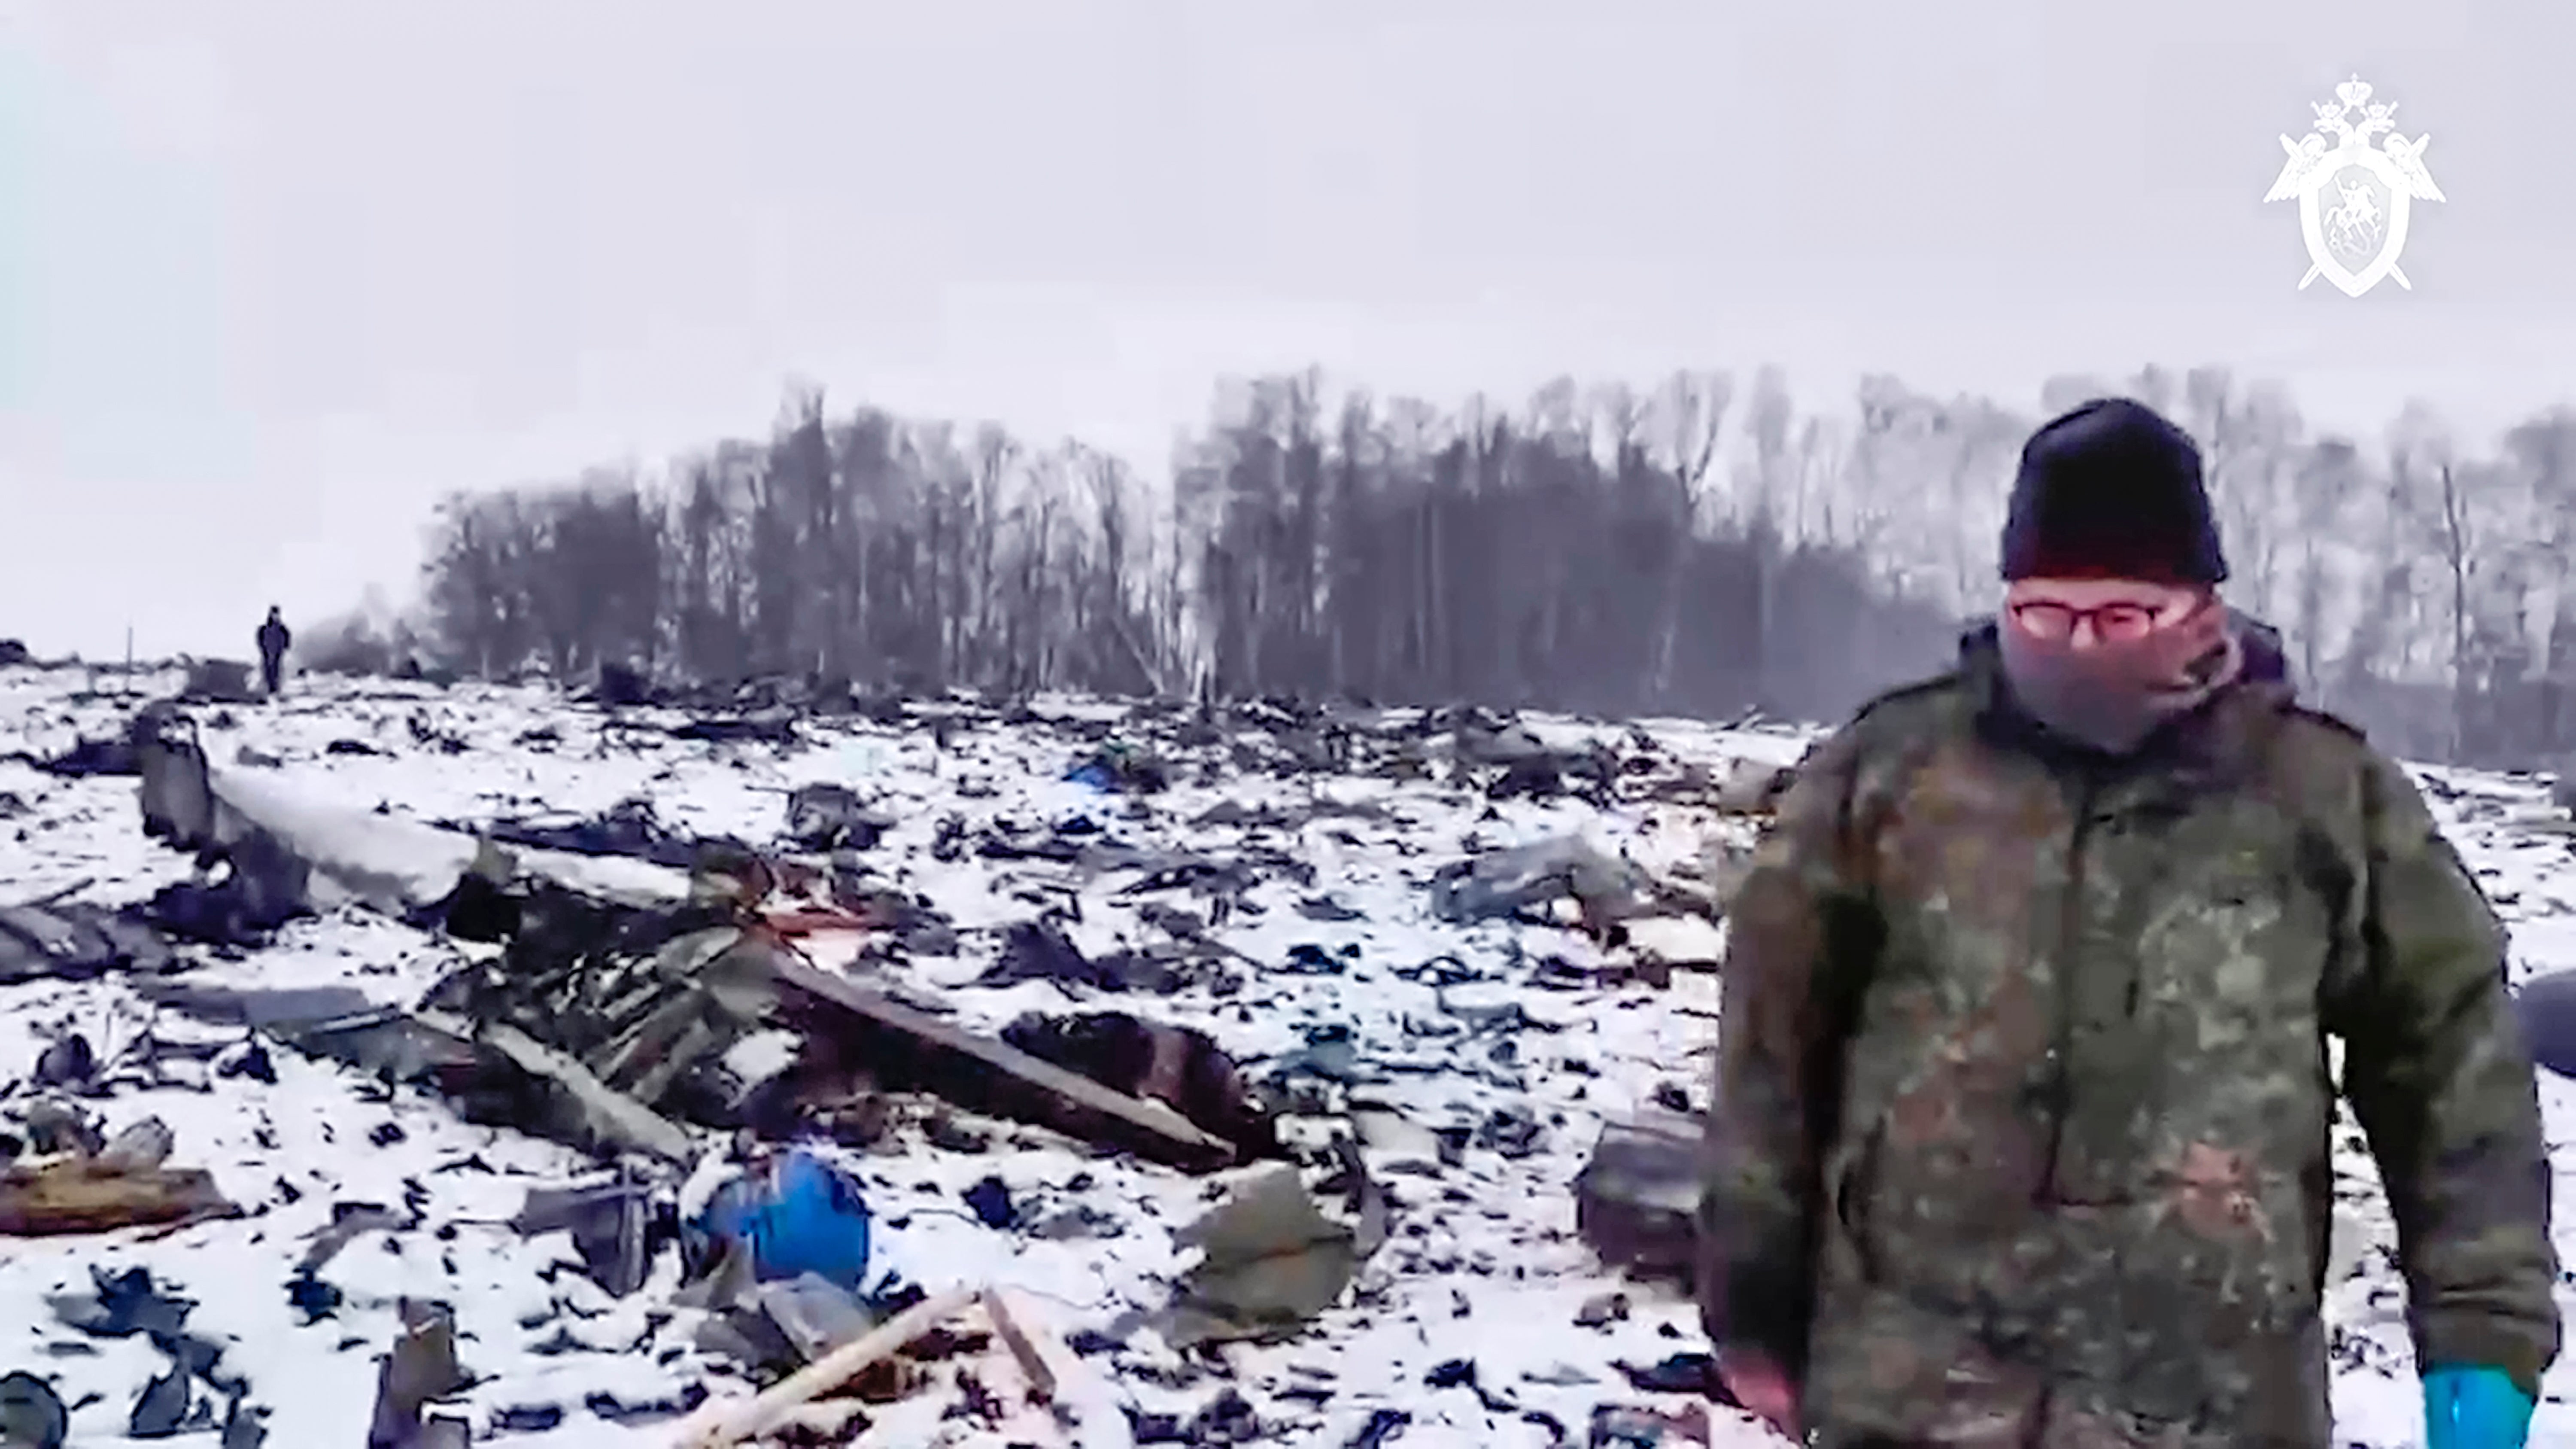 Russian Investigative Committee employee walks in a place with wreckage of the Russian military Il-76 plane crashed area near Yablonovo, Belgorod region of Russia